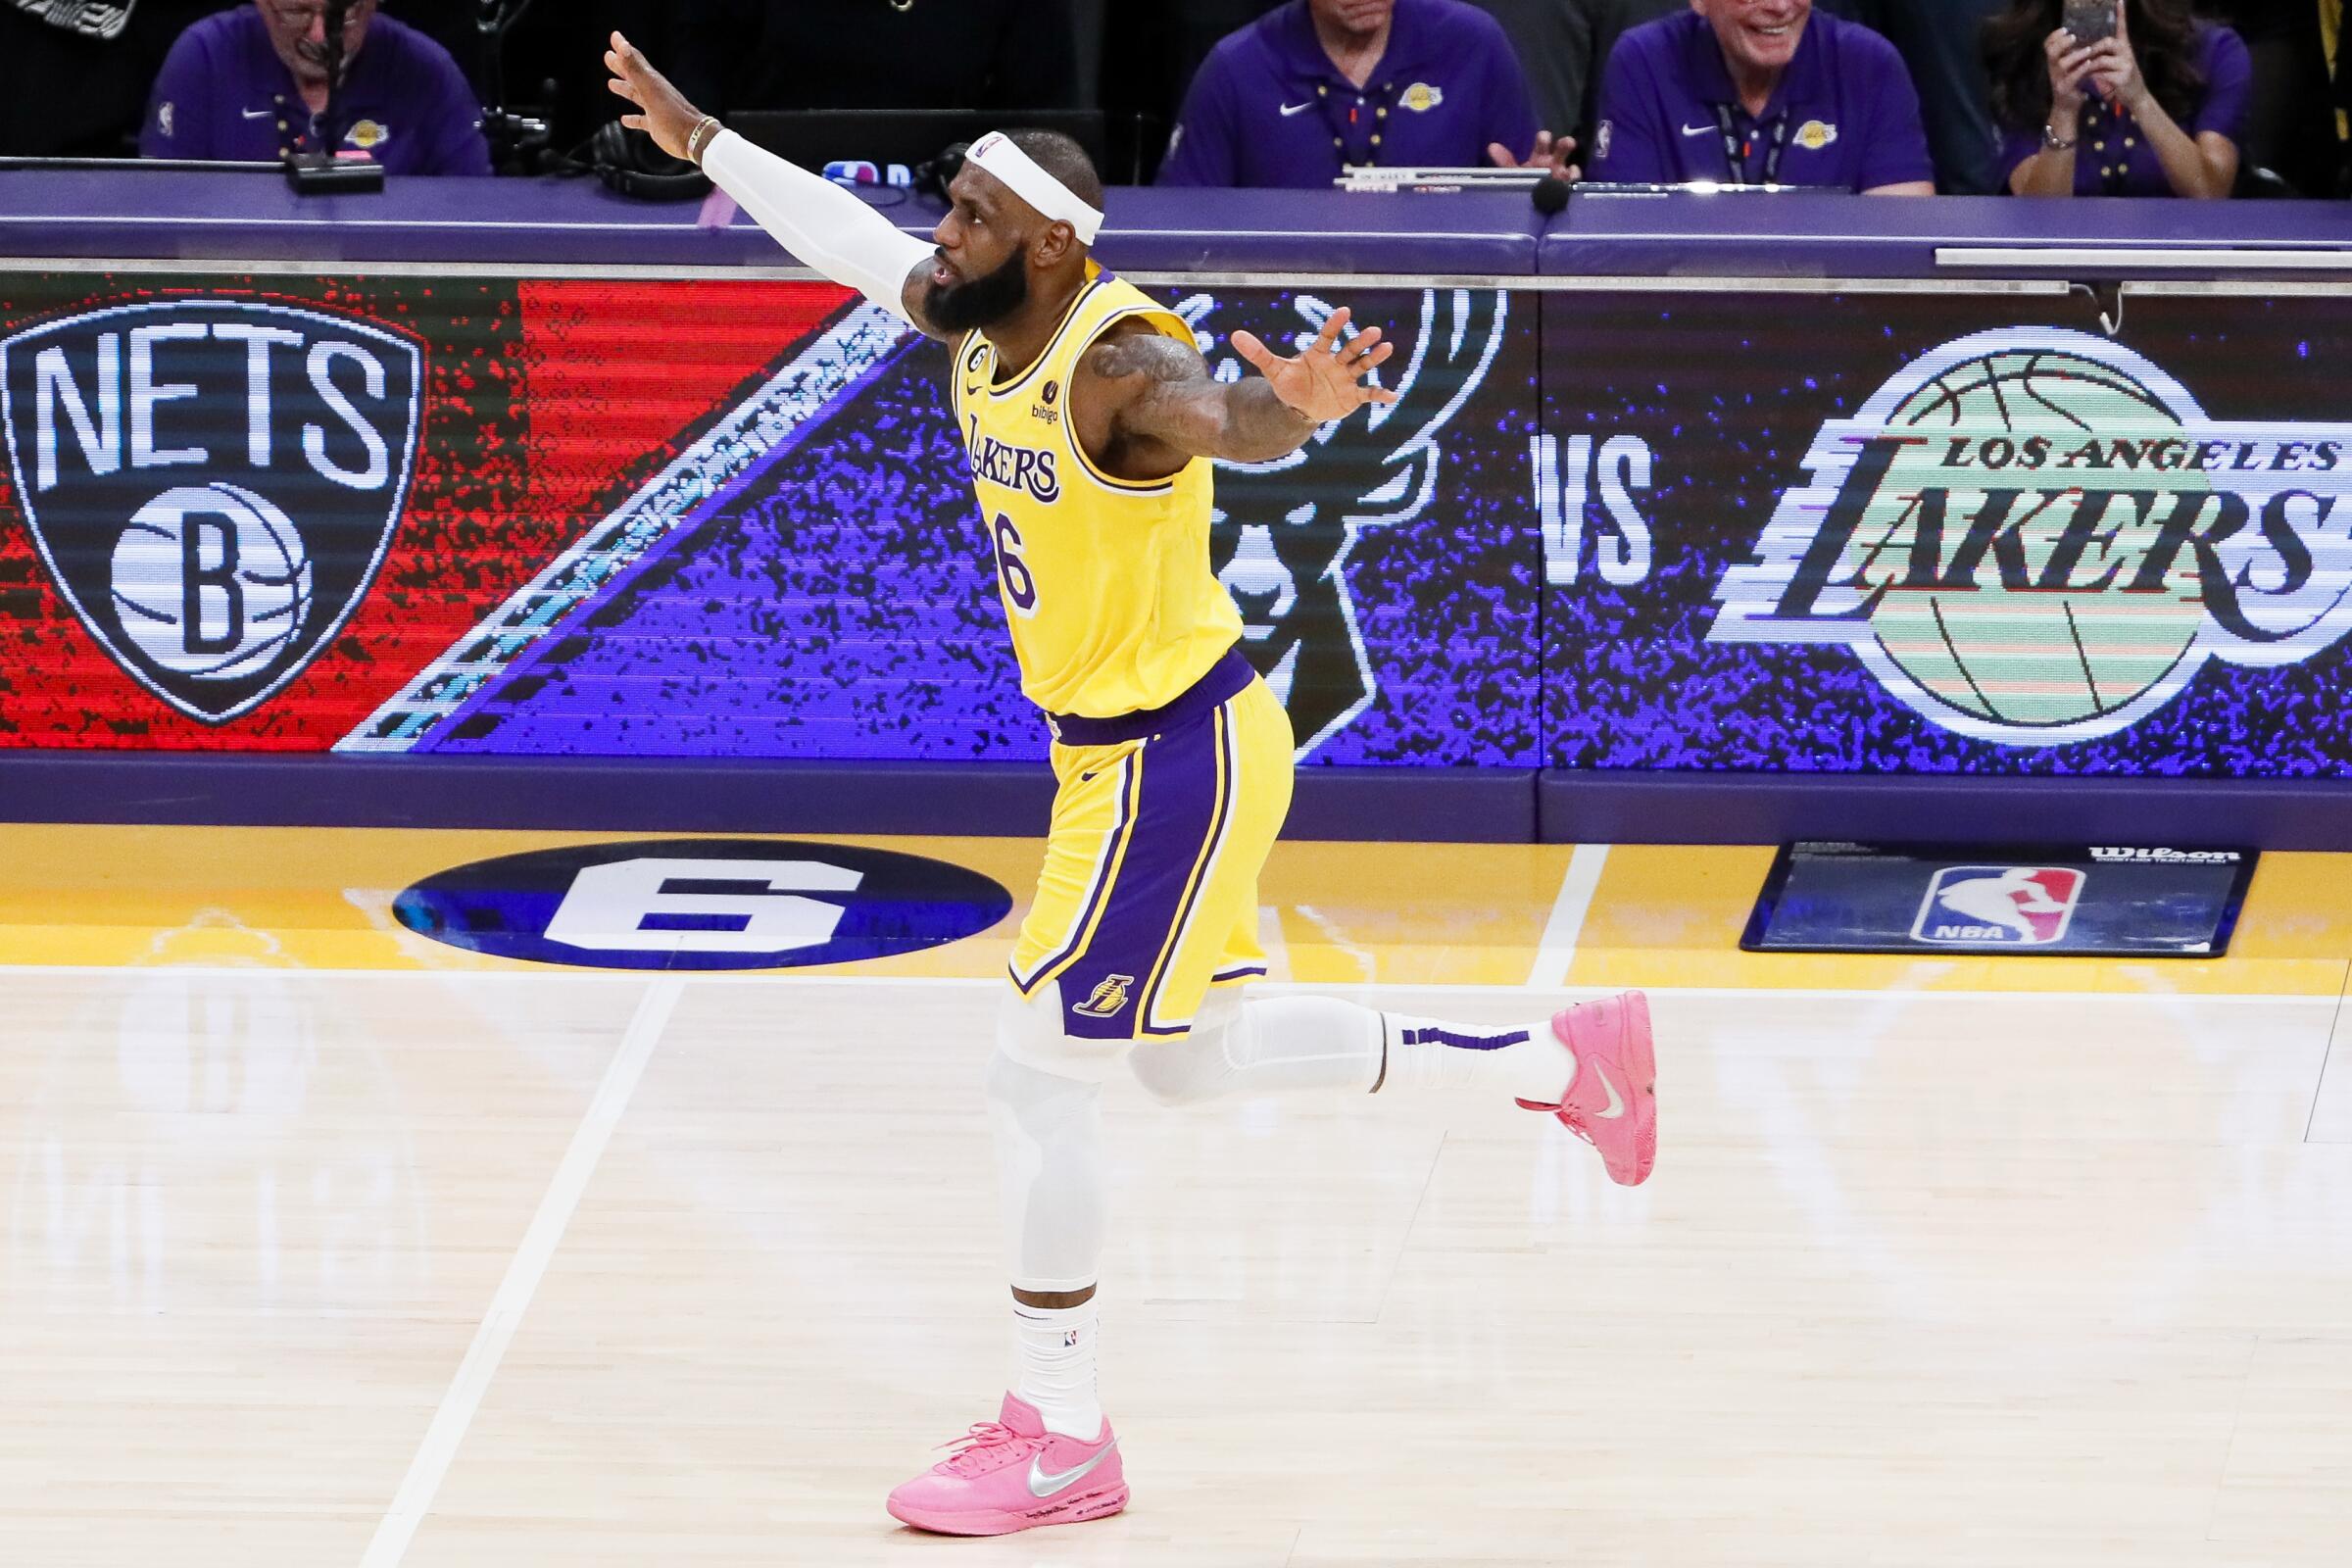 How much money will it cost to see LeBron James break Kareem Abdul